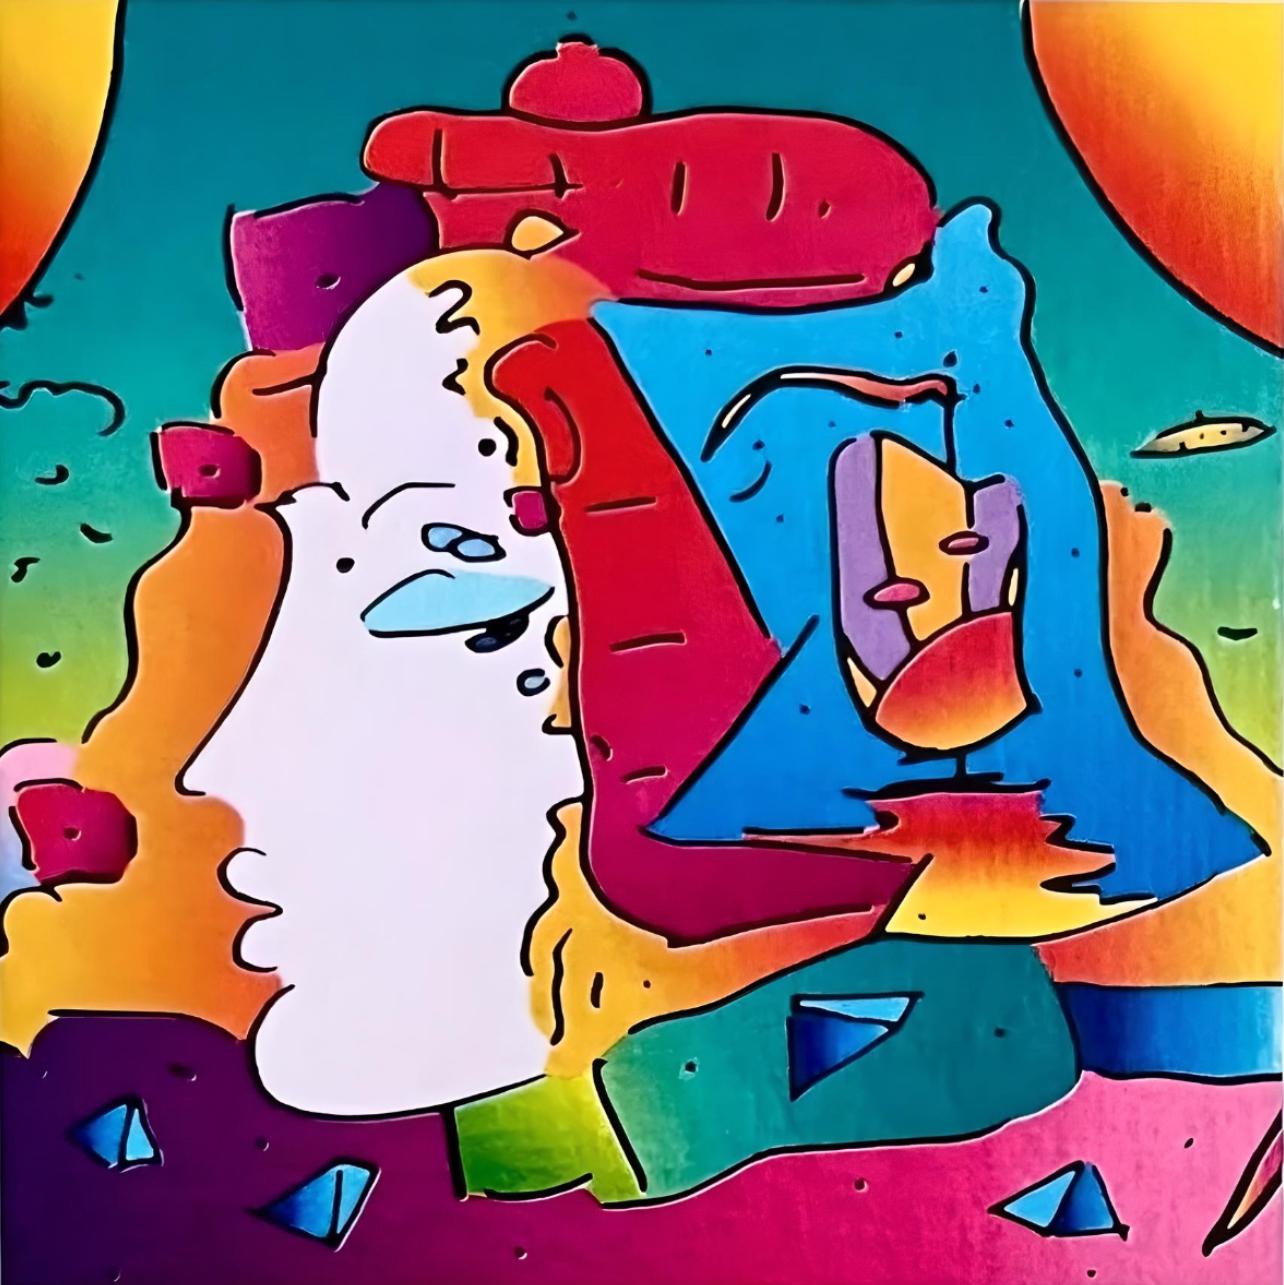 Artist: Peter Max (1937)
Title: Cosmic Profile
Year: 2003
Edition: 451/500, plus proofs
Medium: Lithograph on Lustro Saxony paper
Size: 3.43 x 2.62 inches
Condition: Excellent
Inscription: Signed and numbered by the artist.
Notes: Published by Via